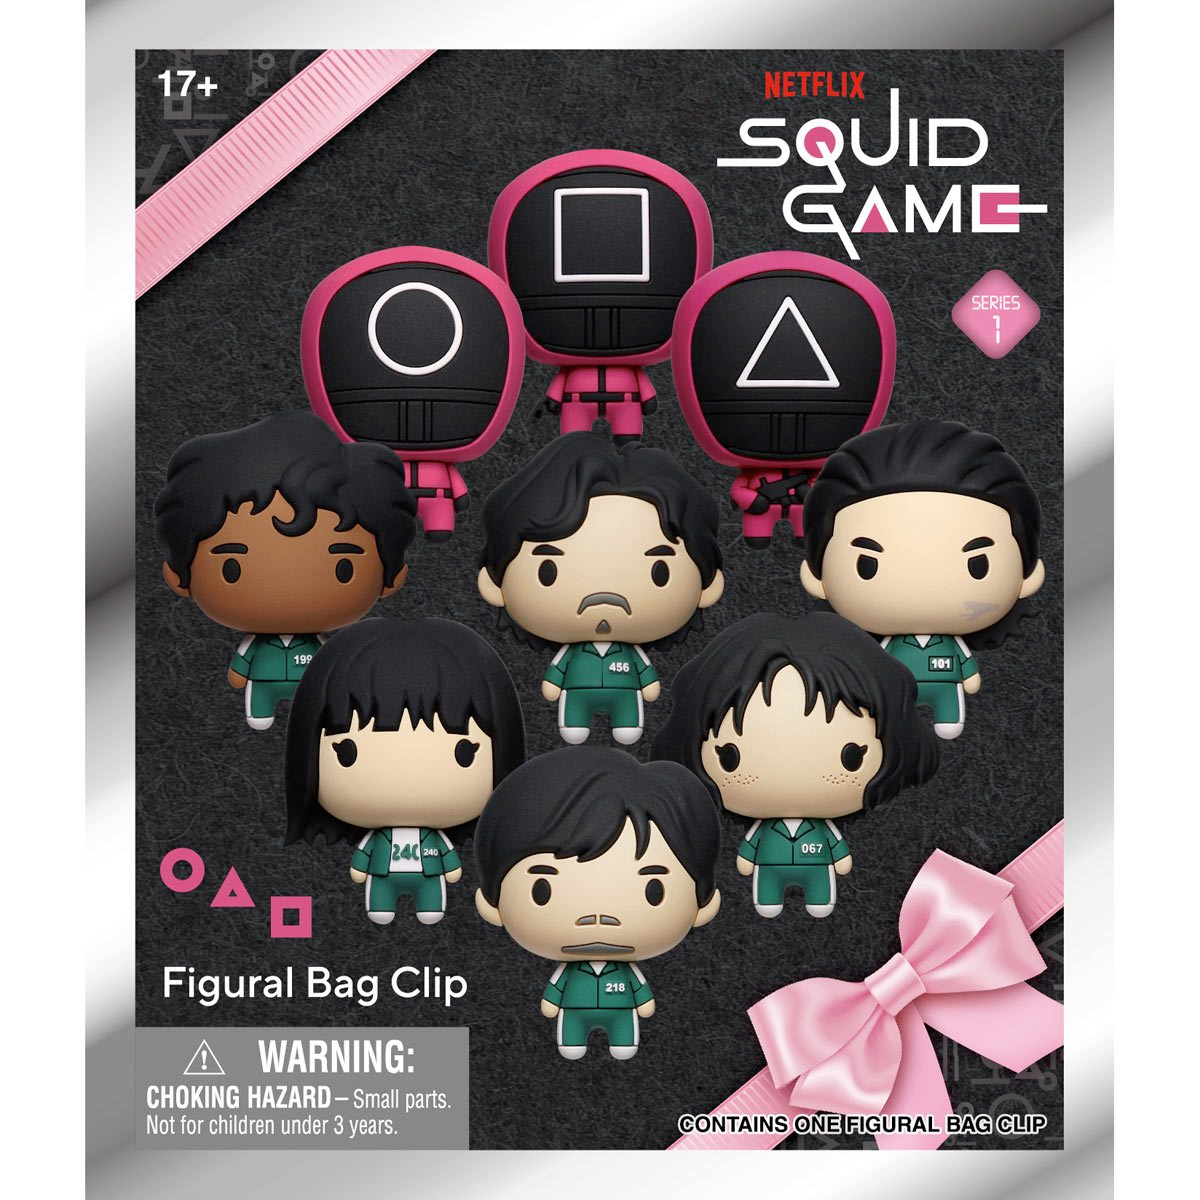 3D Figural Bag Clips Keychains from the Netflix series Round 6 (Squid Game) (Blind-Bag)